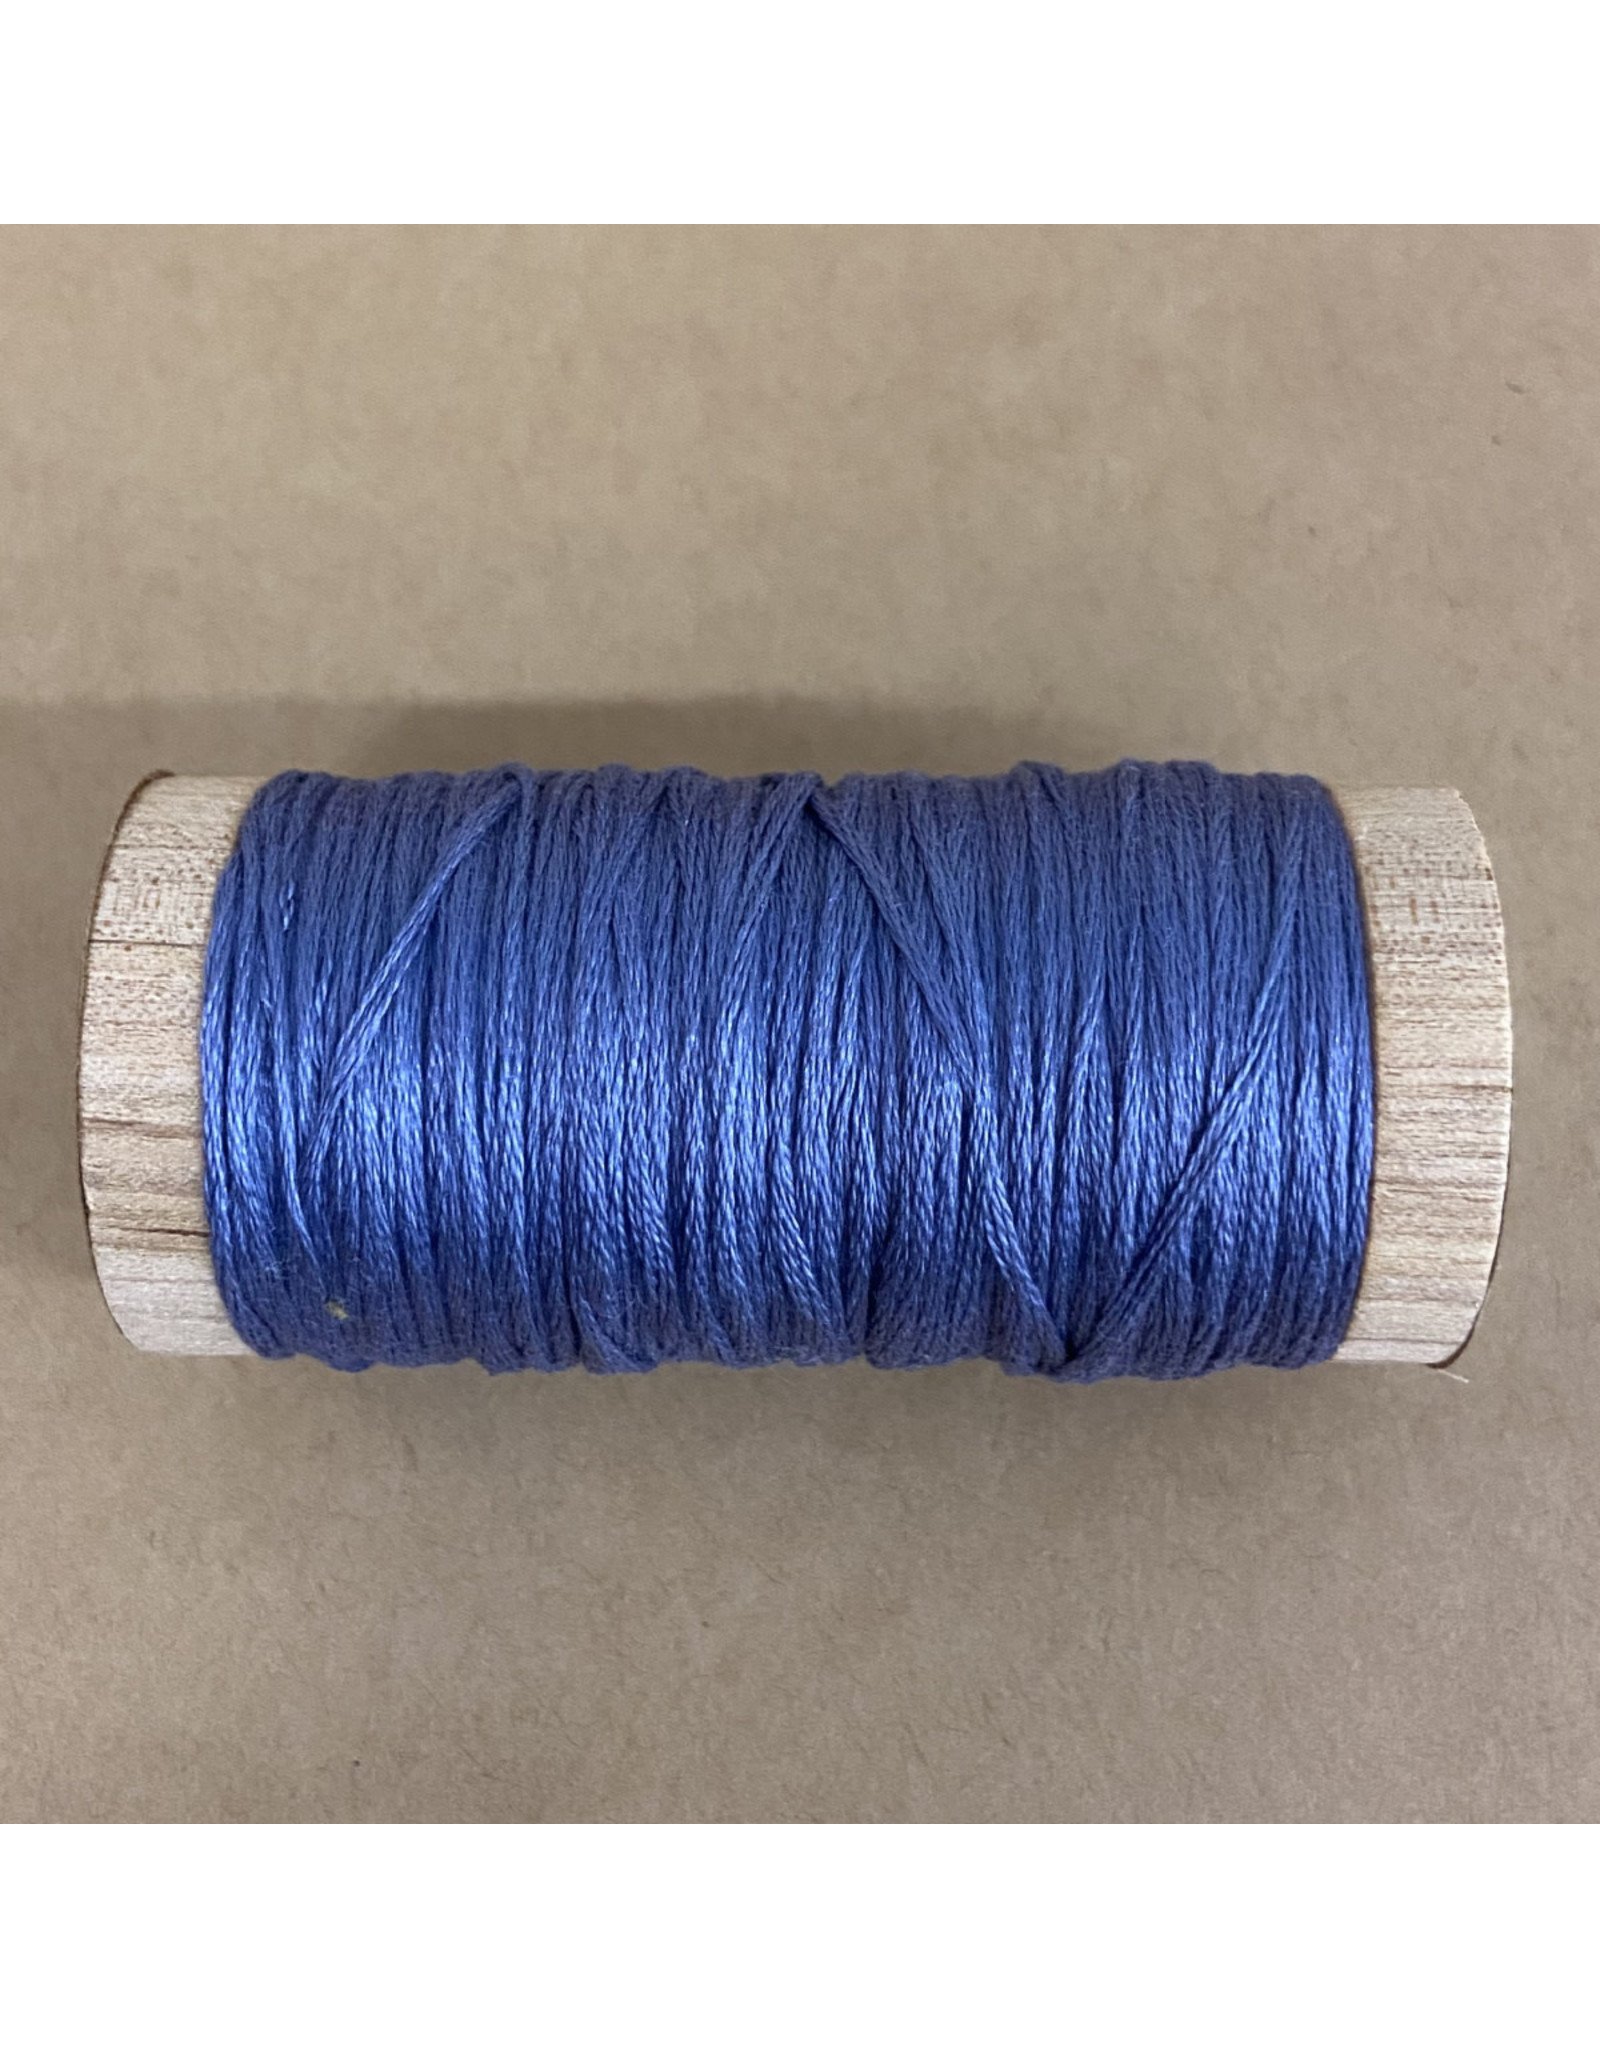 PD Embroidery Floss, Extra Large Spool, Denim